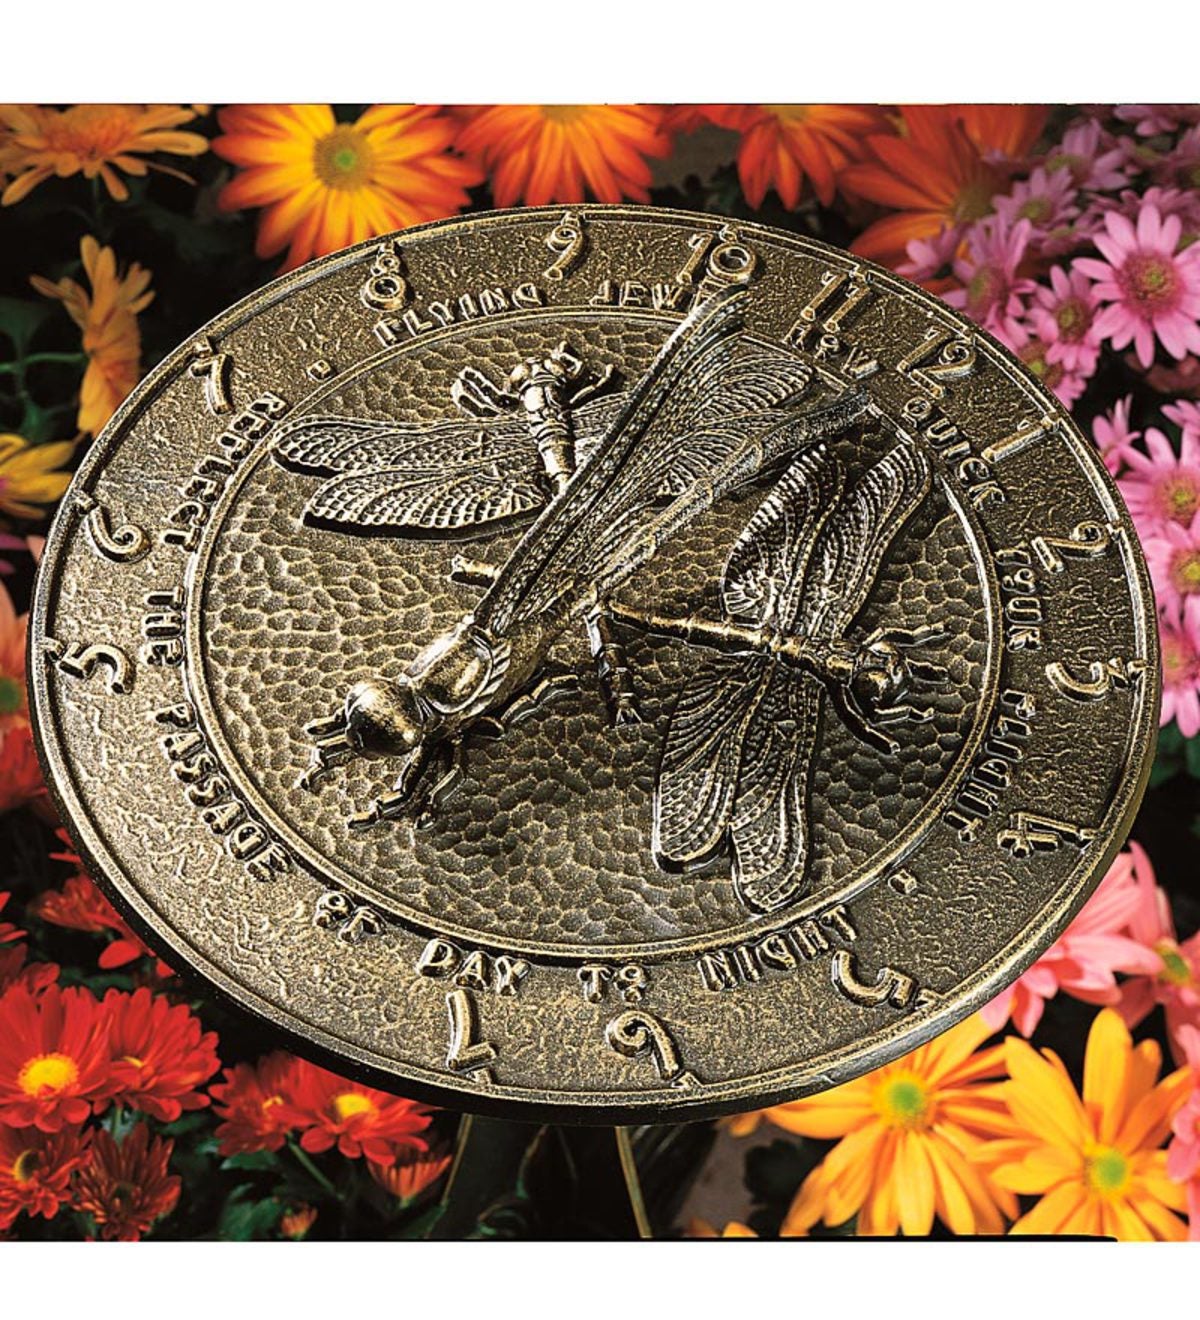 Made in America Recycled Aluminum Dragonfly Sundial